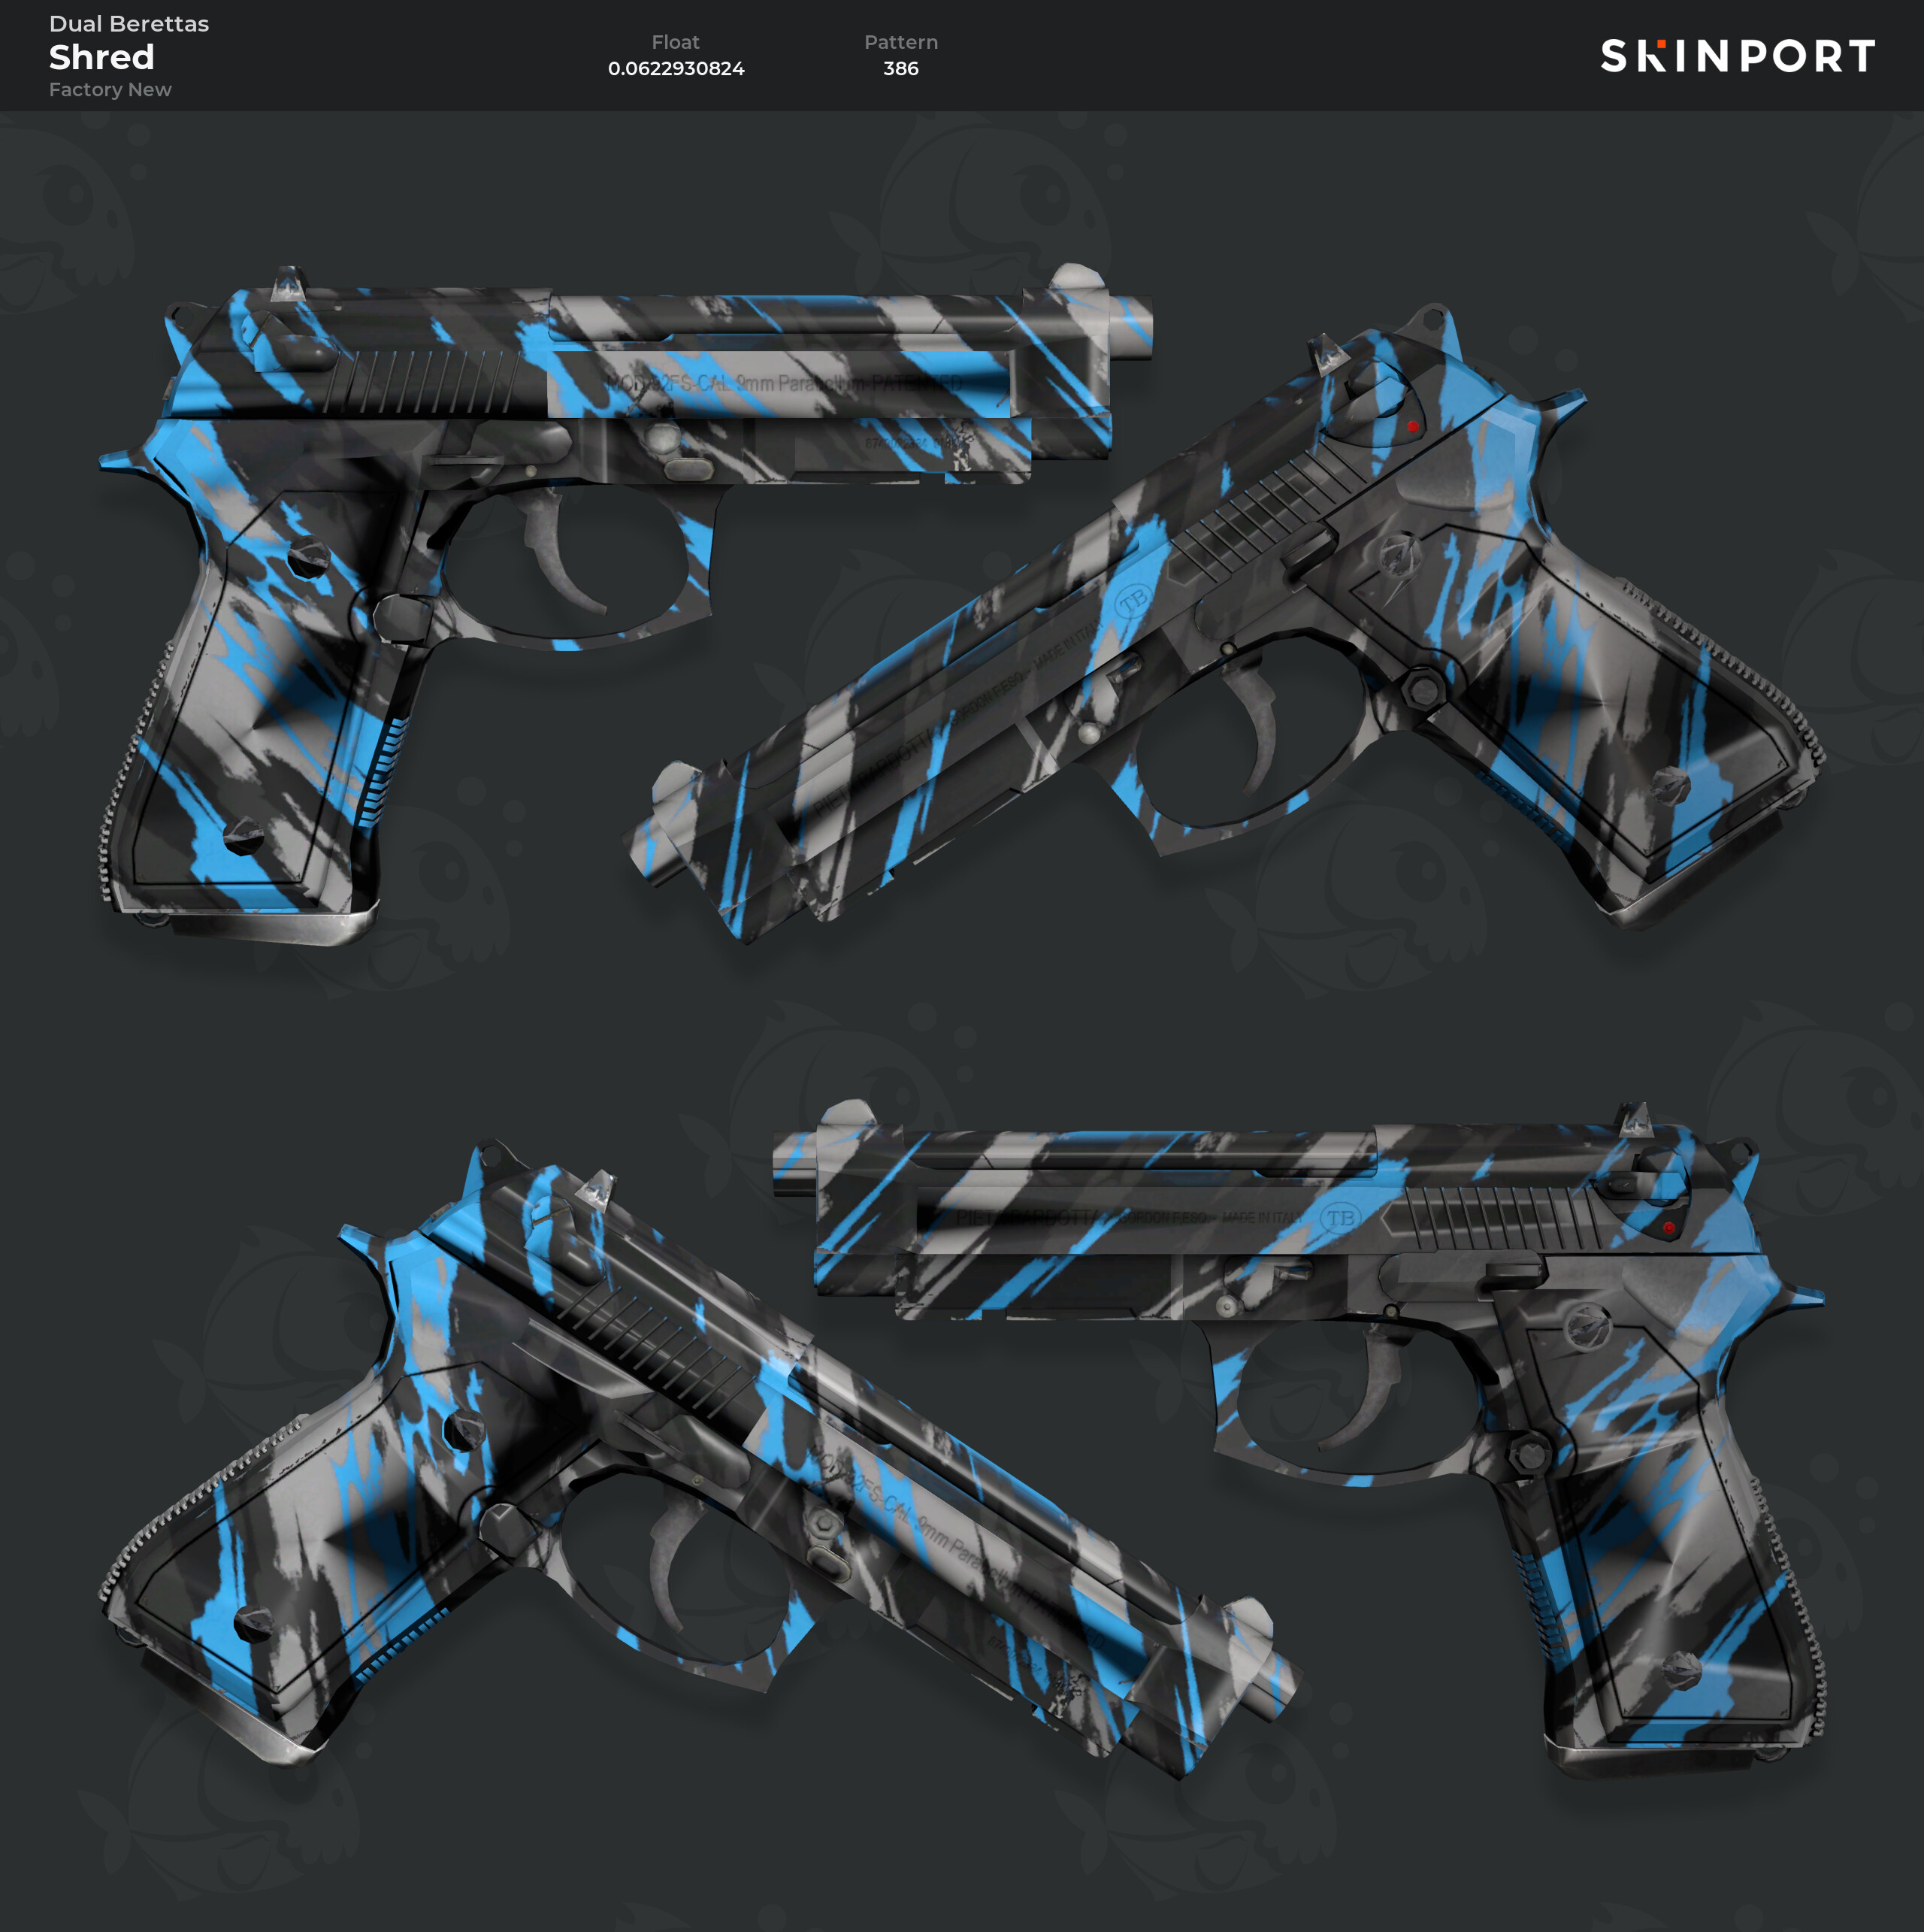 download the last version for mac Dual Berettas Stained cs go skin